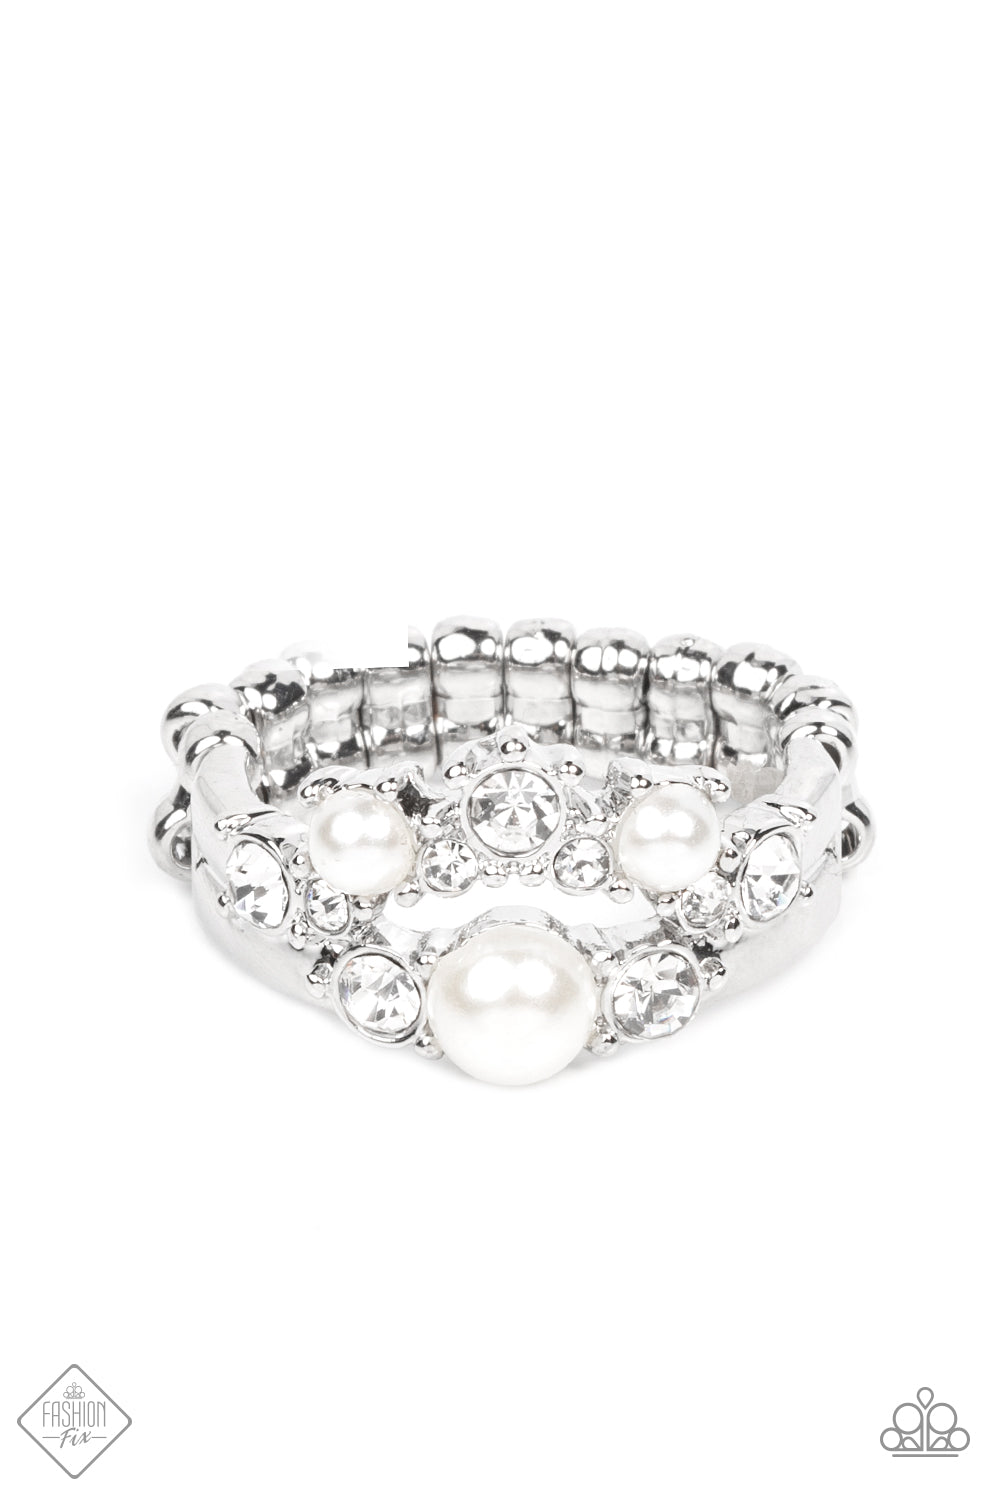 ​A-List Ambience - White Pearl - Silver Ring - Paparazzi Accessories - Featuring pronged silver fittings, a bubbly collection of white pearls and glassy white rhinestones coalesce into two effervescent bands across the finger. Features a dainty stretchy band for a flexible fit. Sold as one individual ring.